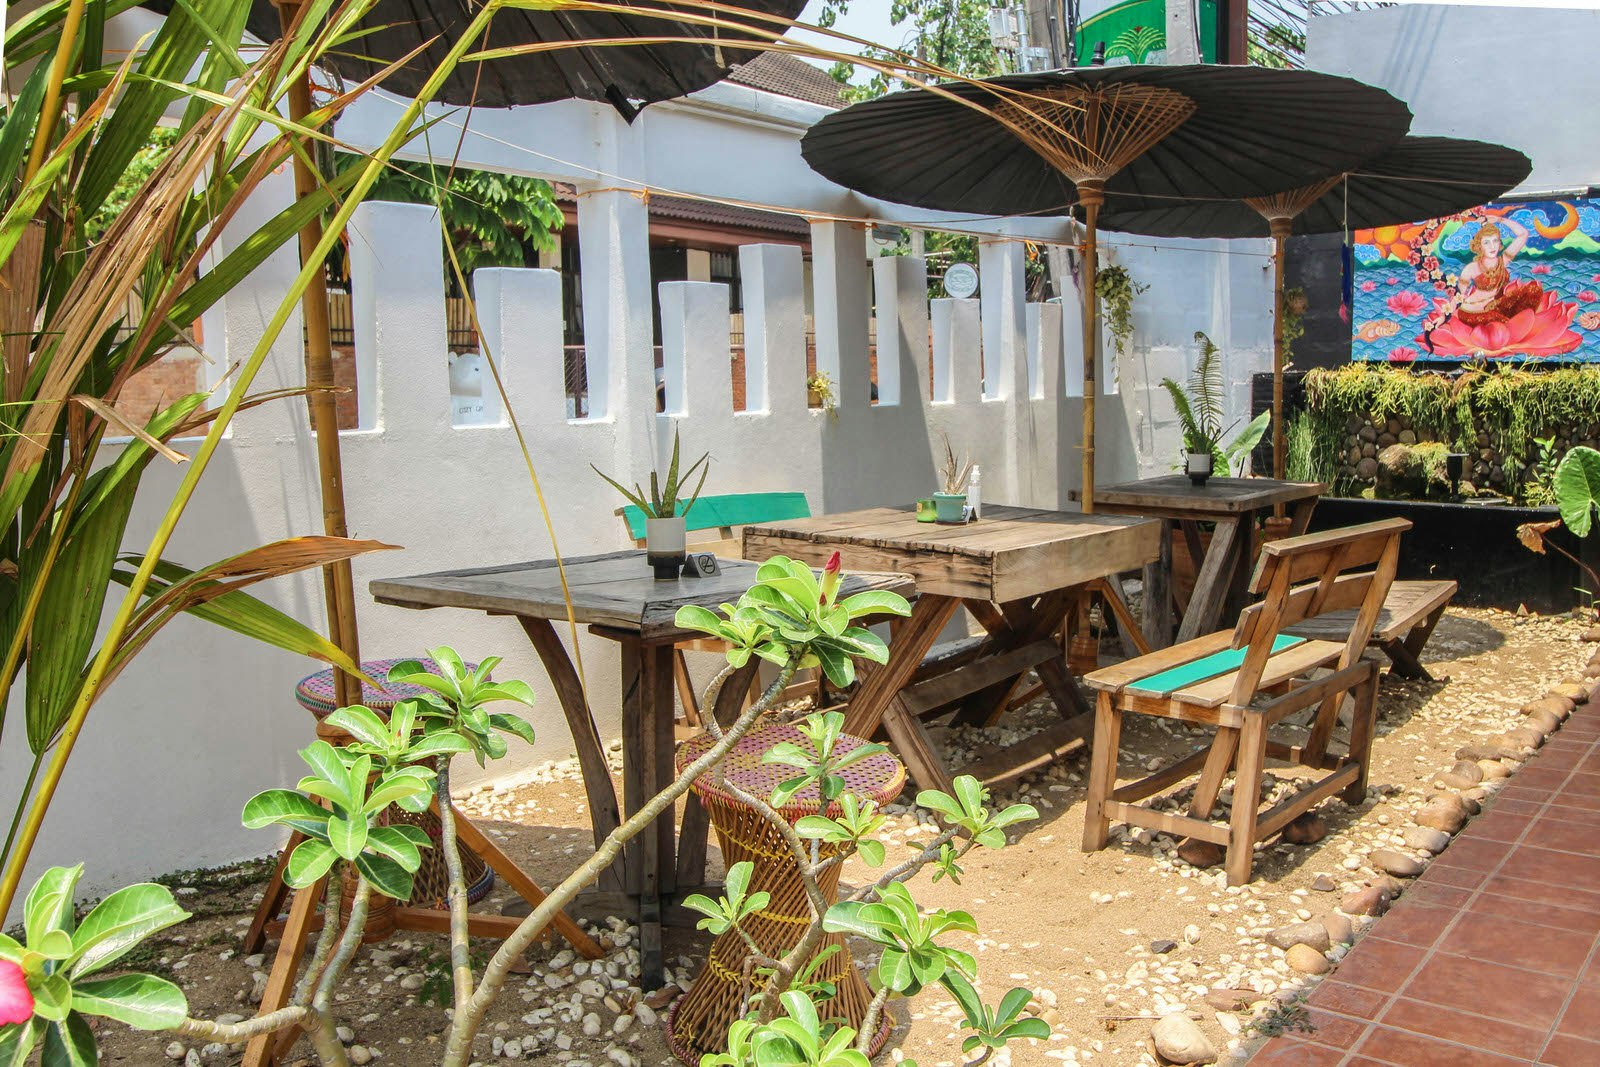 The outside seating area at Free Bird Cafe in Chiang Mai. Wooden tables and chairs are shaded by straw parasols. There is a colourful mural on the far wall. 